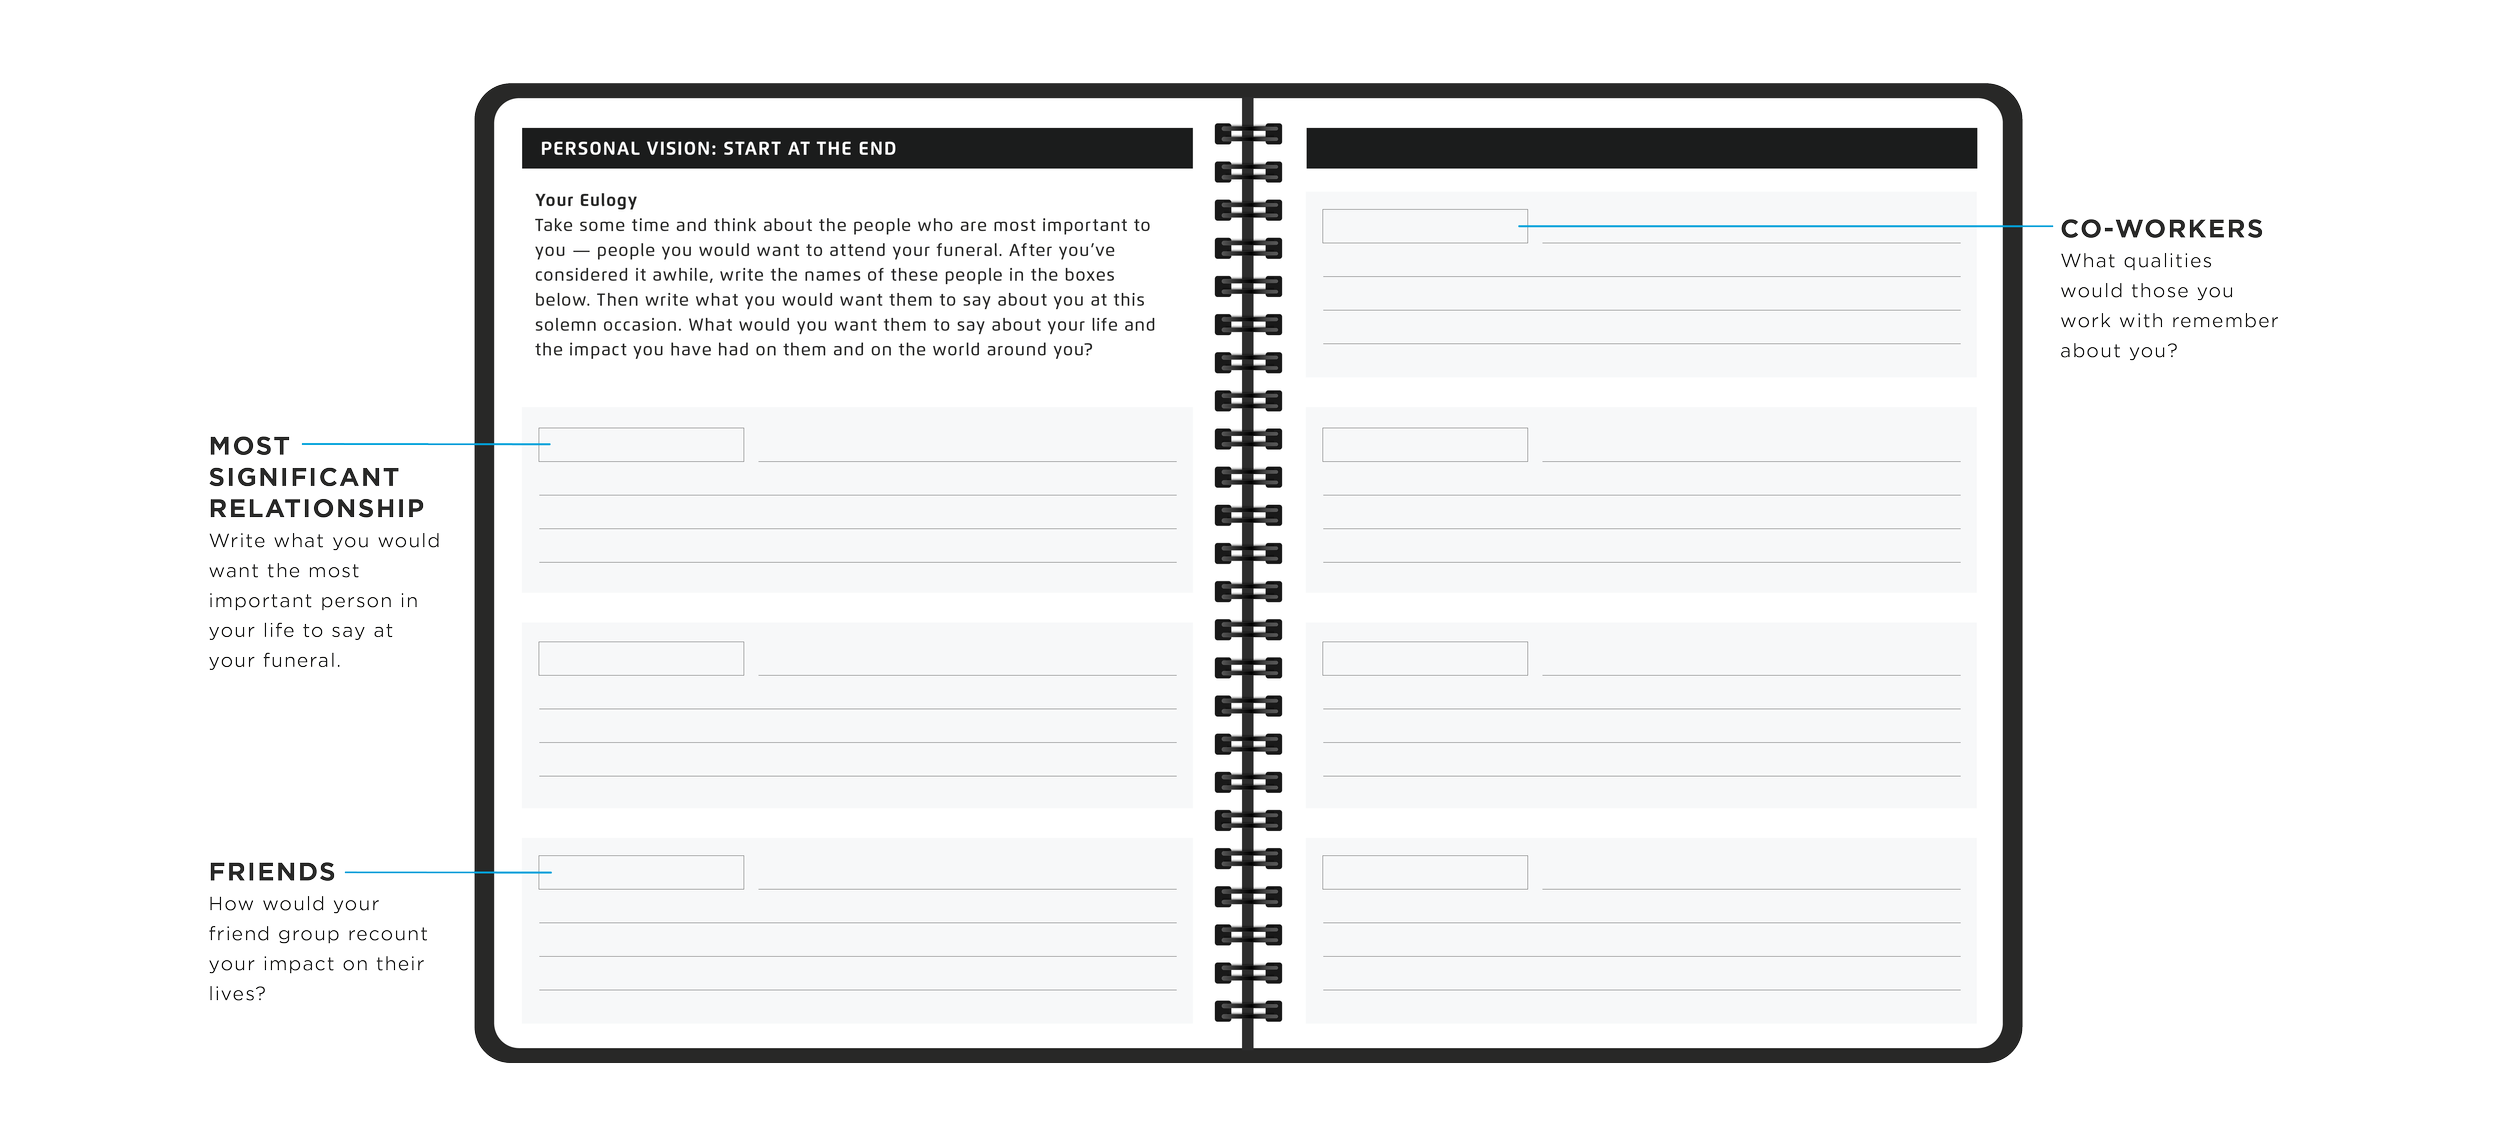 Better Planner - Spread Web Mockups_Personal Vision- Eulogy.png